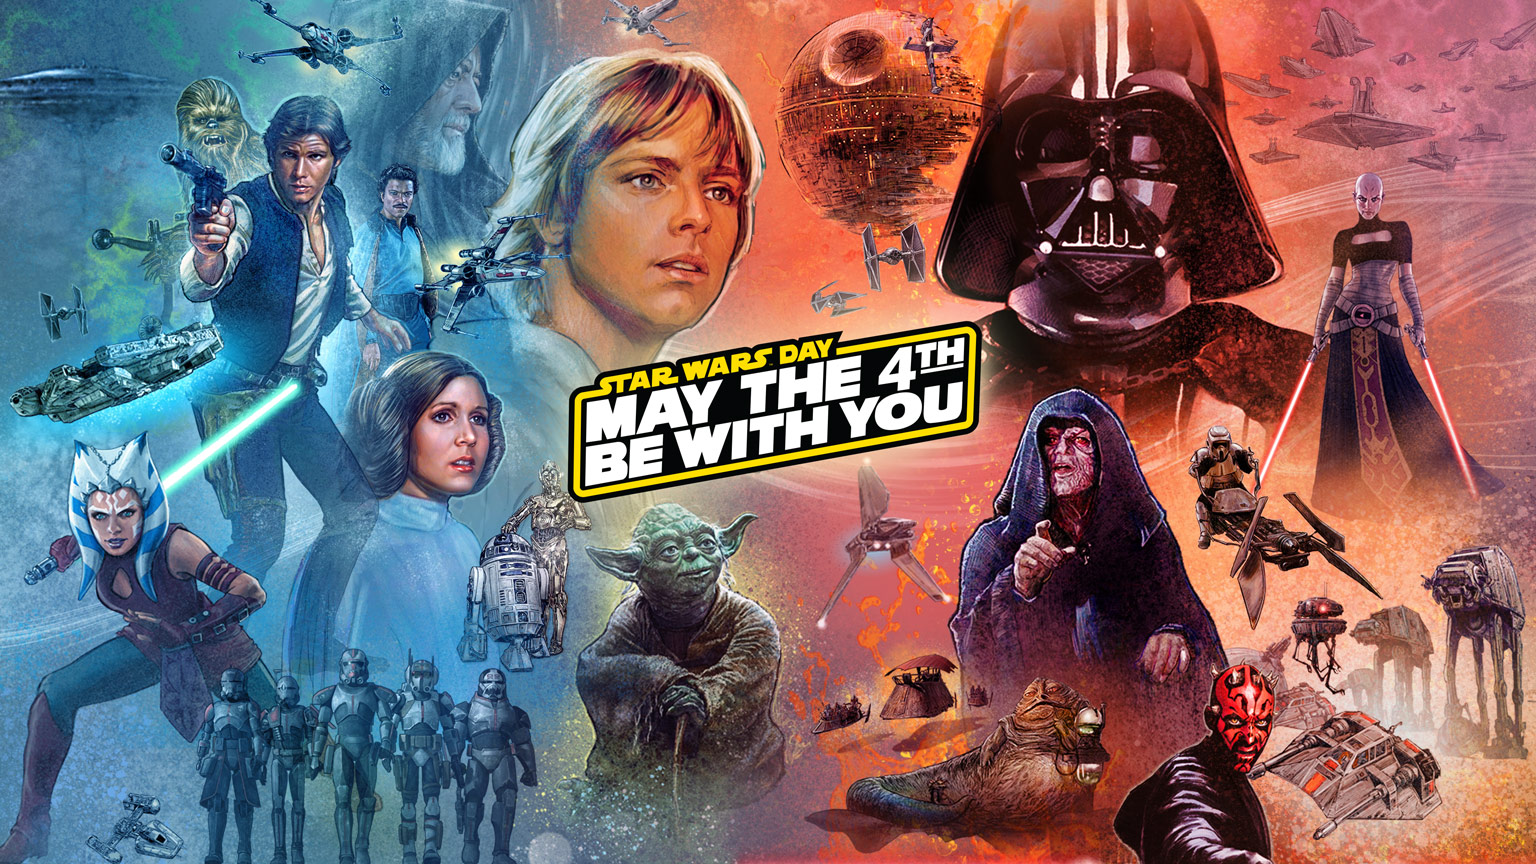 May the 4th is here again—so save your credits for this Star Wars